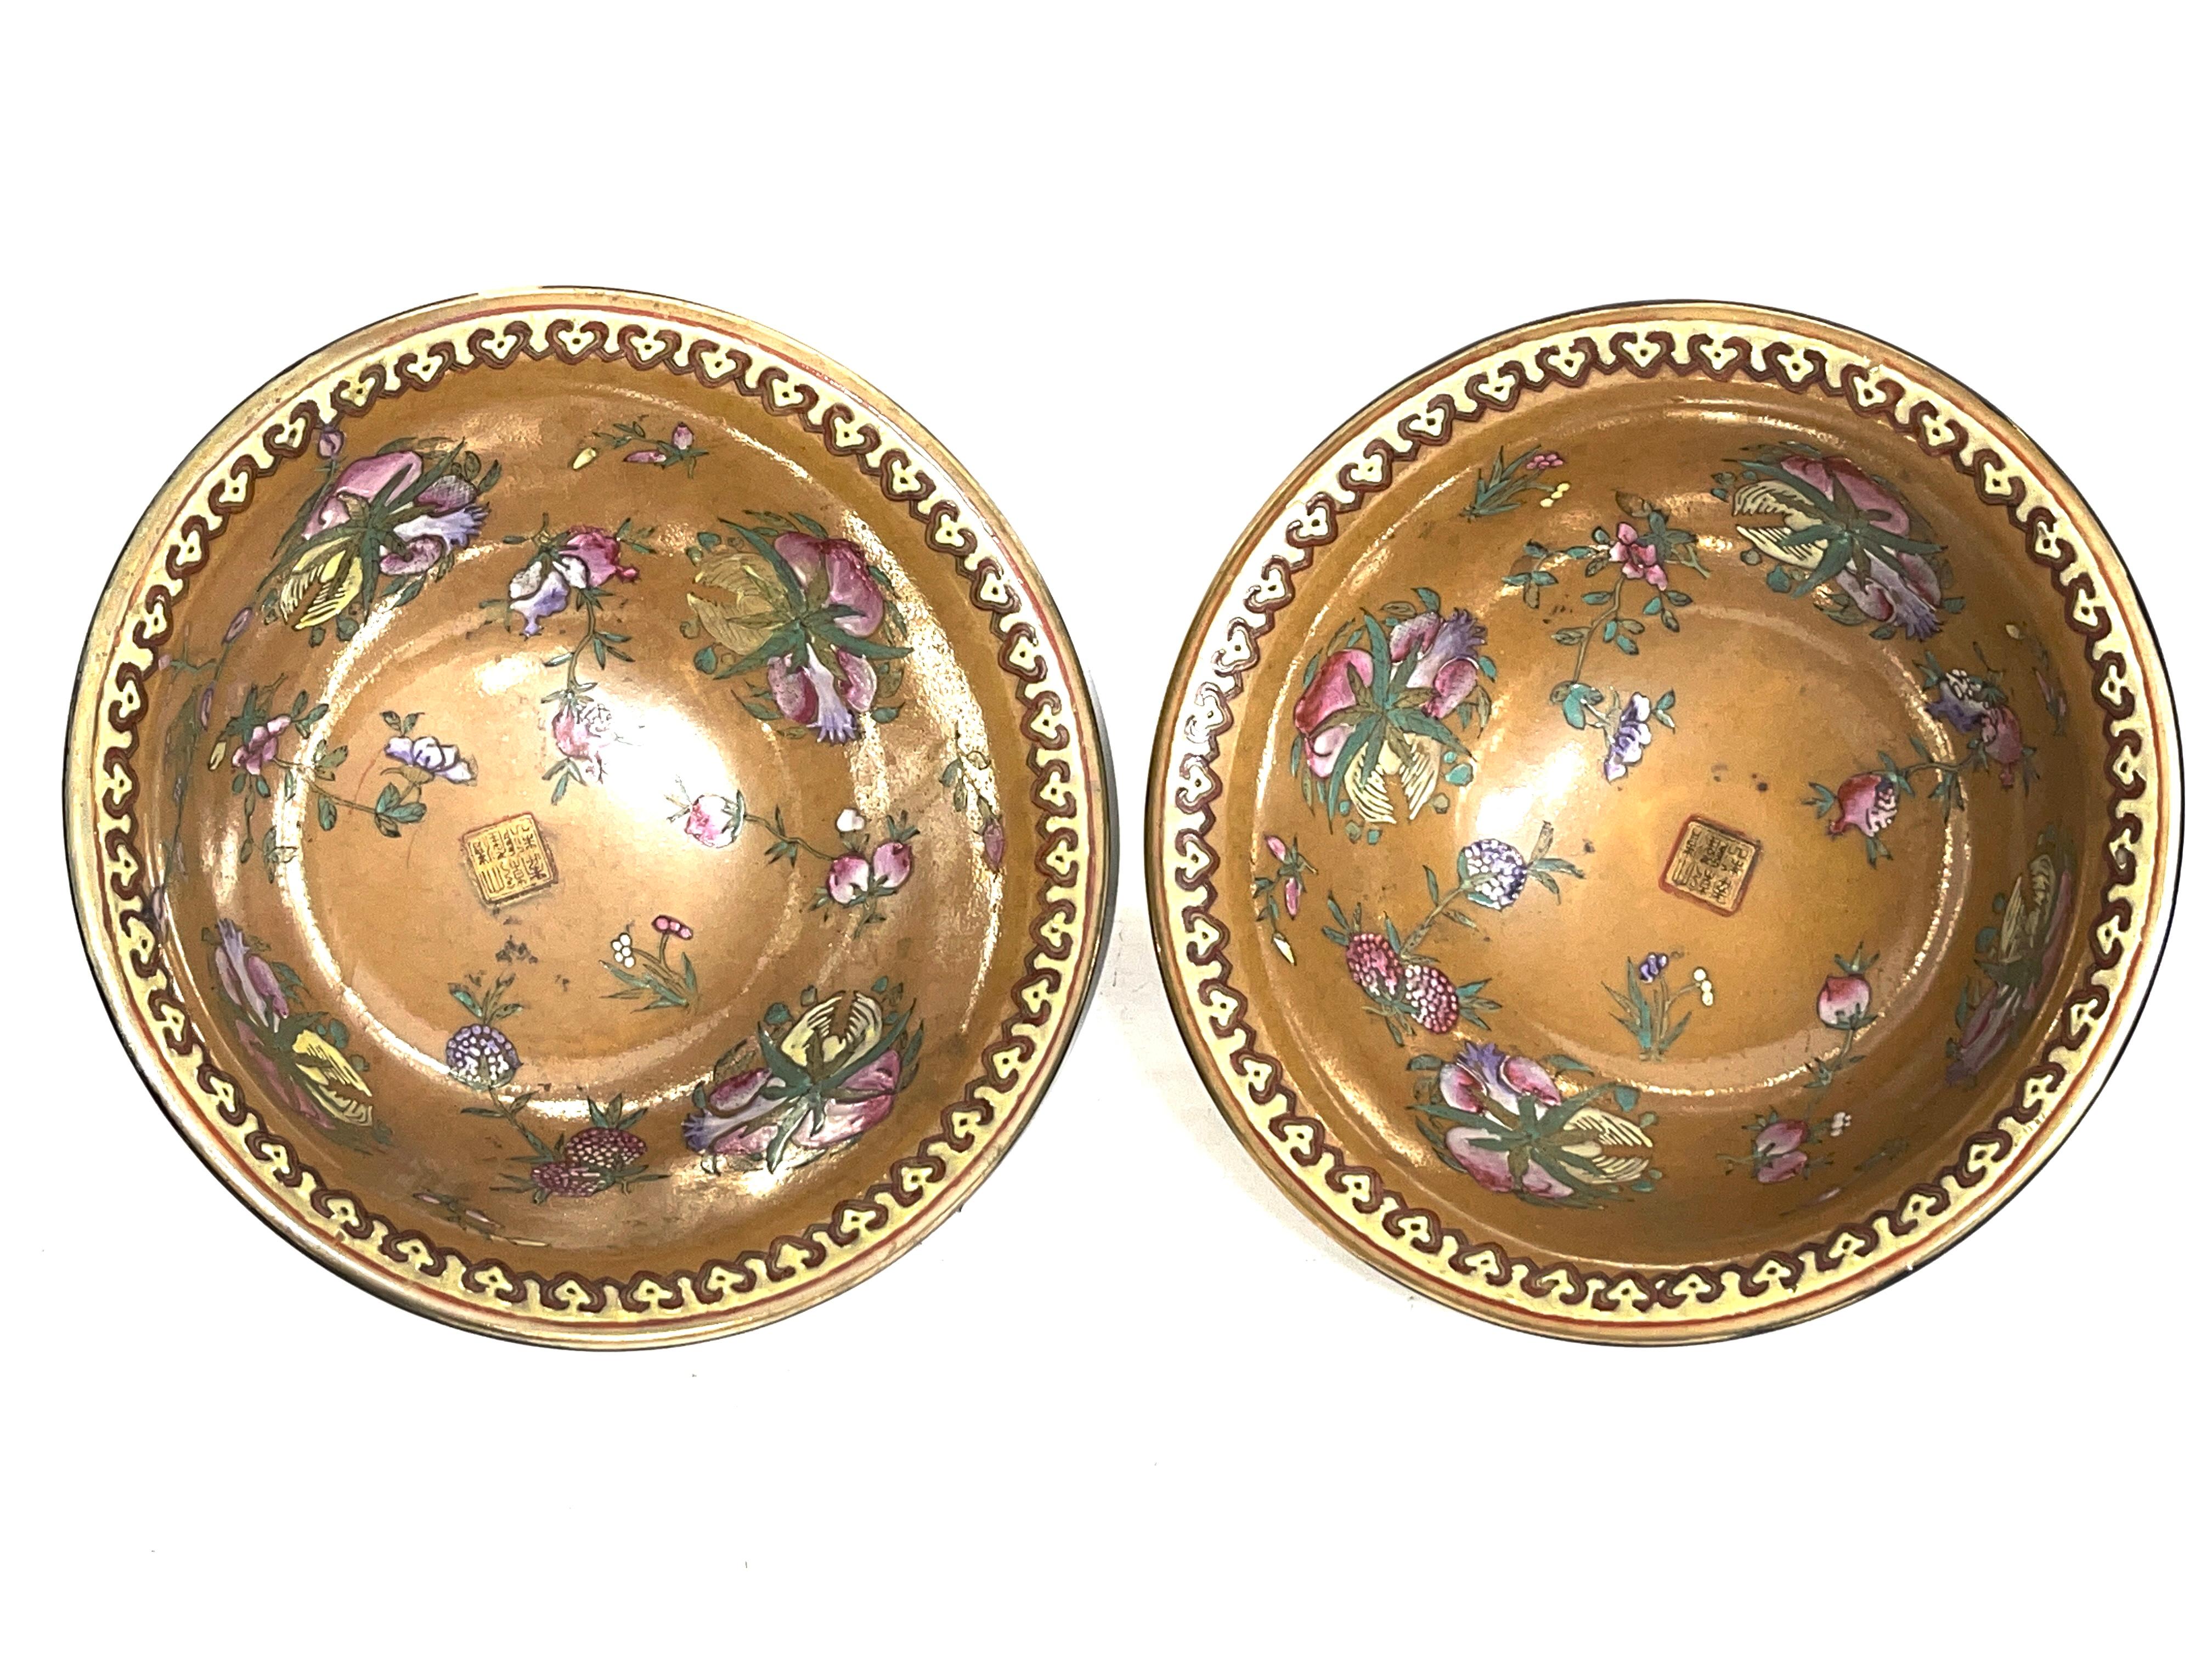 Pair of Antique Chinese Ceramic Bowls, 20th Century, Asian Art For Sale 2